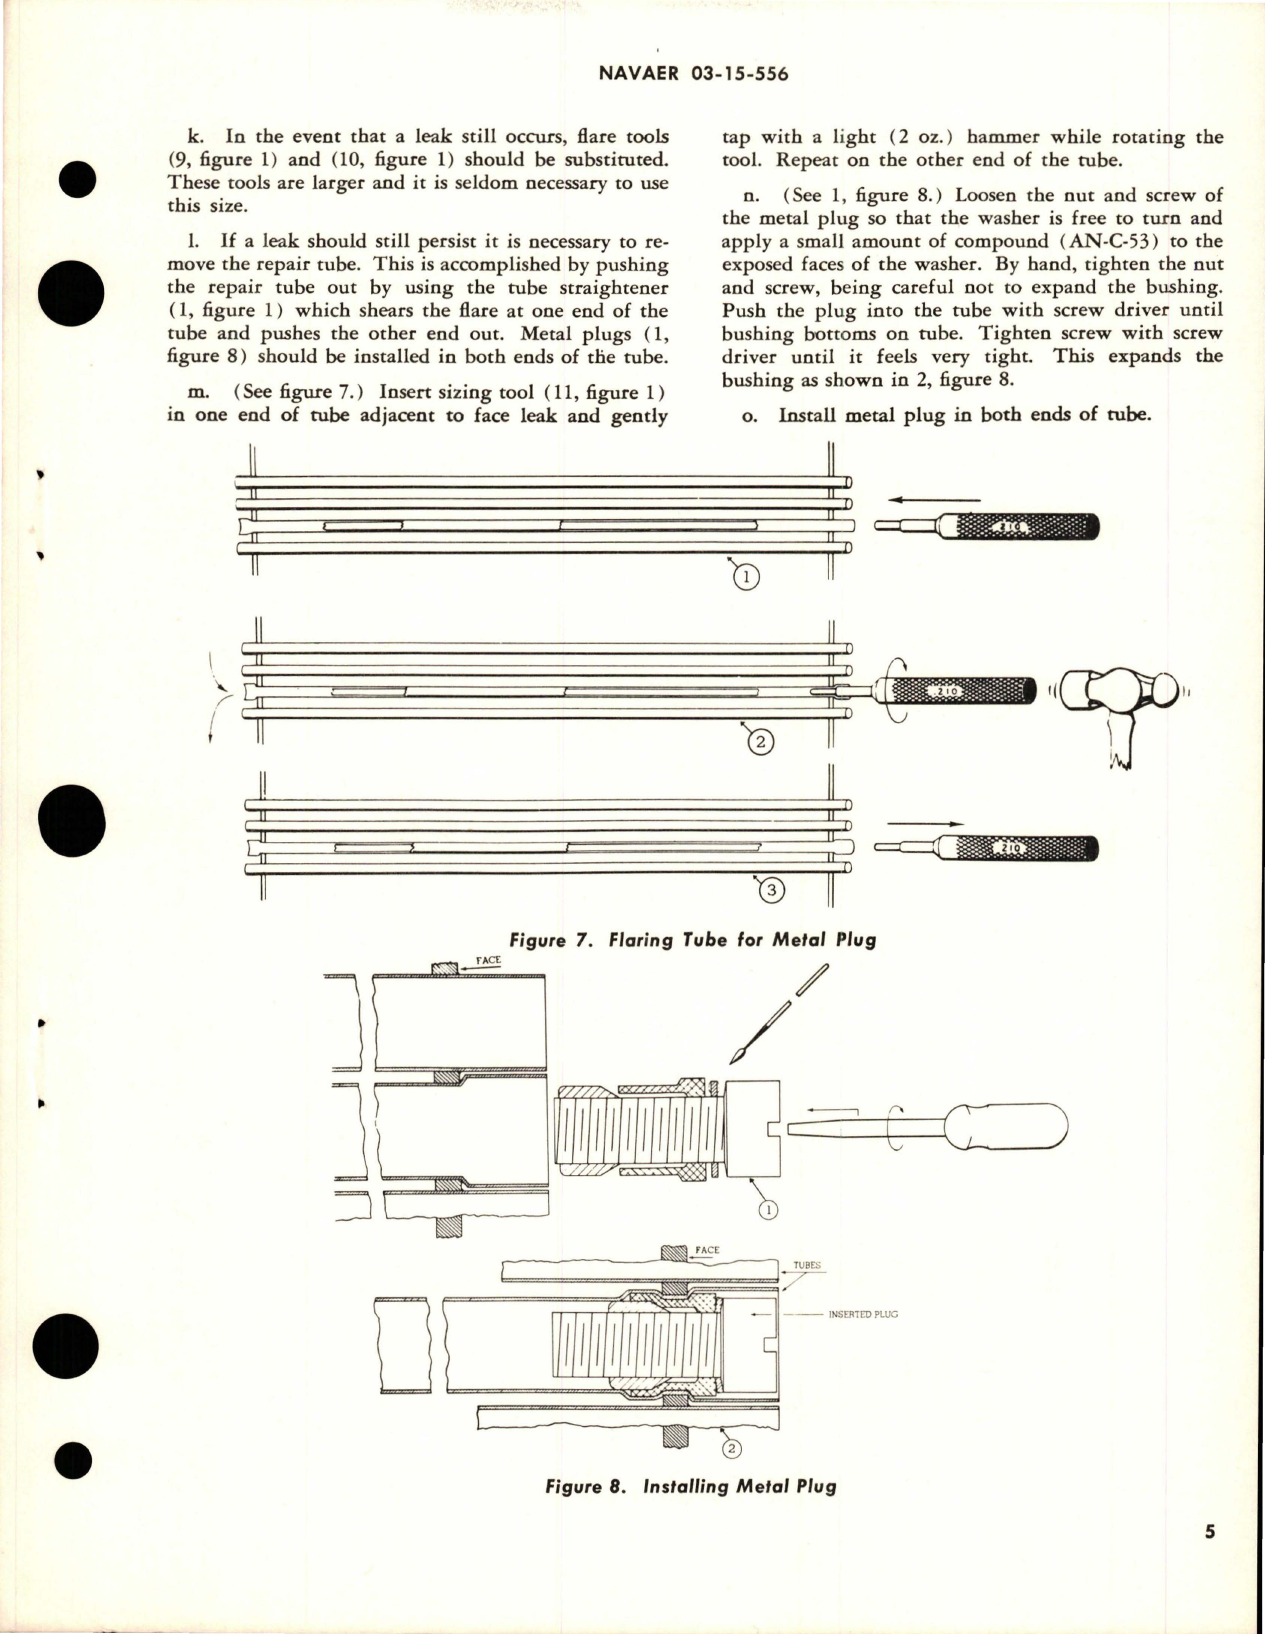 Sample page 5 from AirCorps Library document: Overhaul Instructions with Parts for Oil Coolers - Parts 69092 and 69093